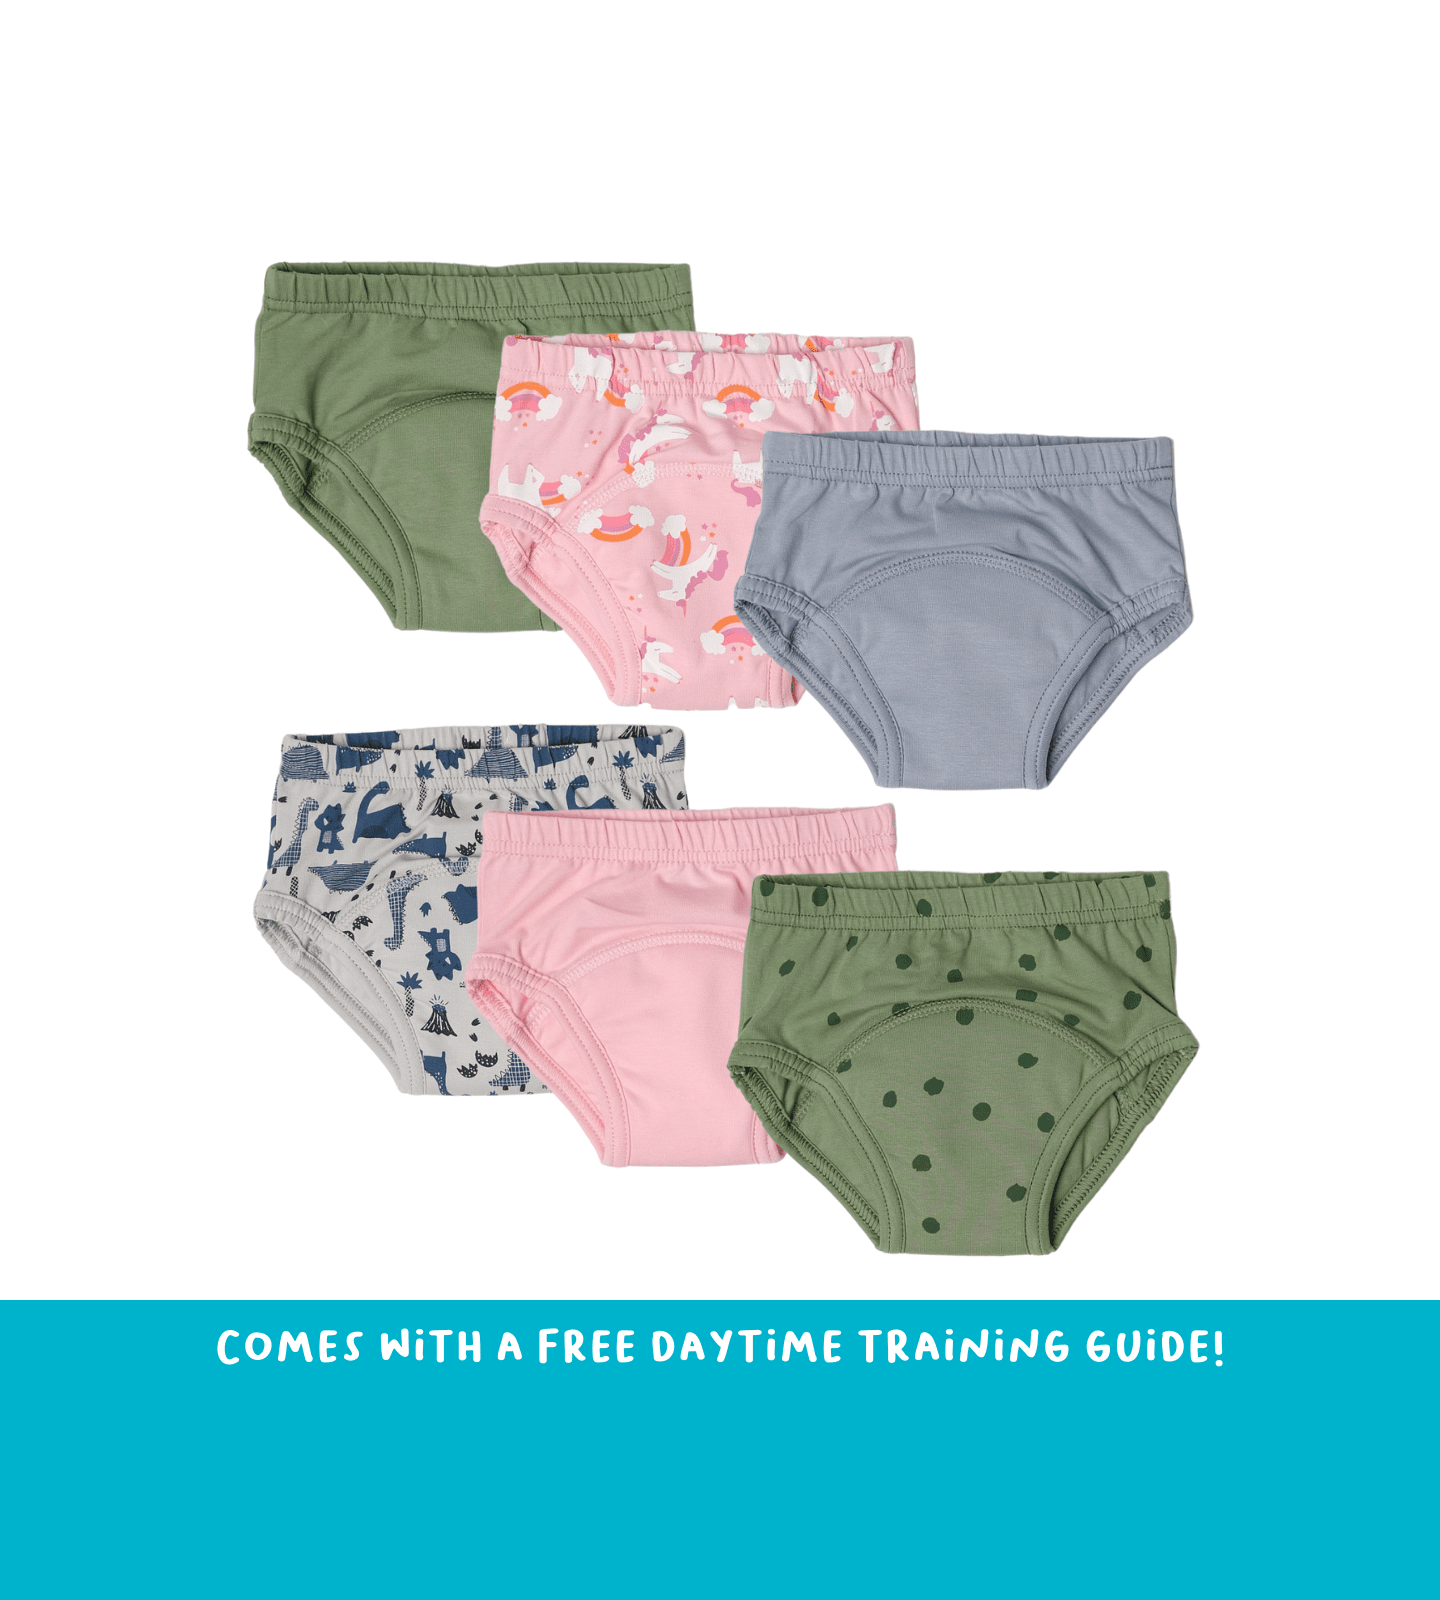 Best Nighttime Underwear for Toddlers Toilet Training Underwear - China  Best Training Underpants and Toilet Training Underwear Nz price